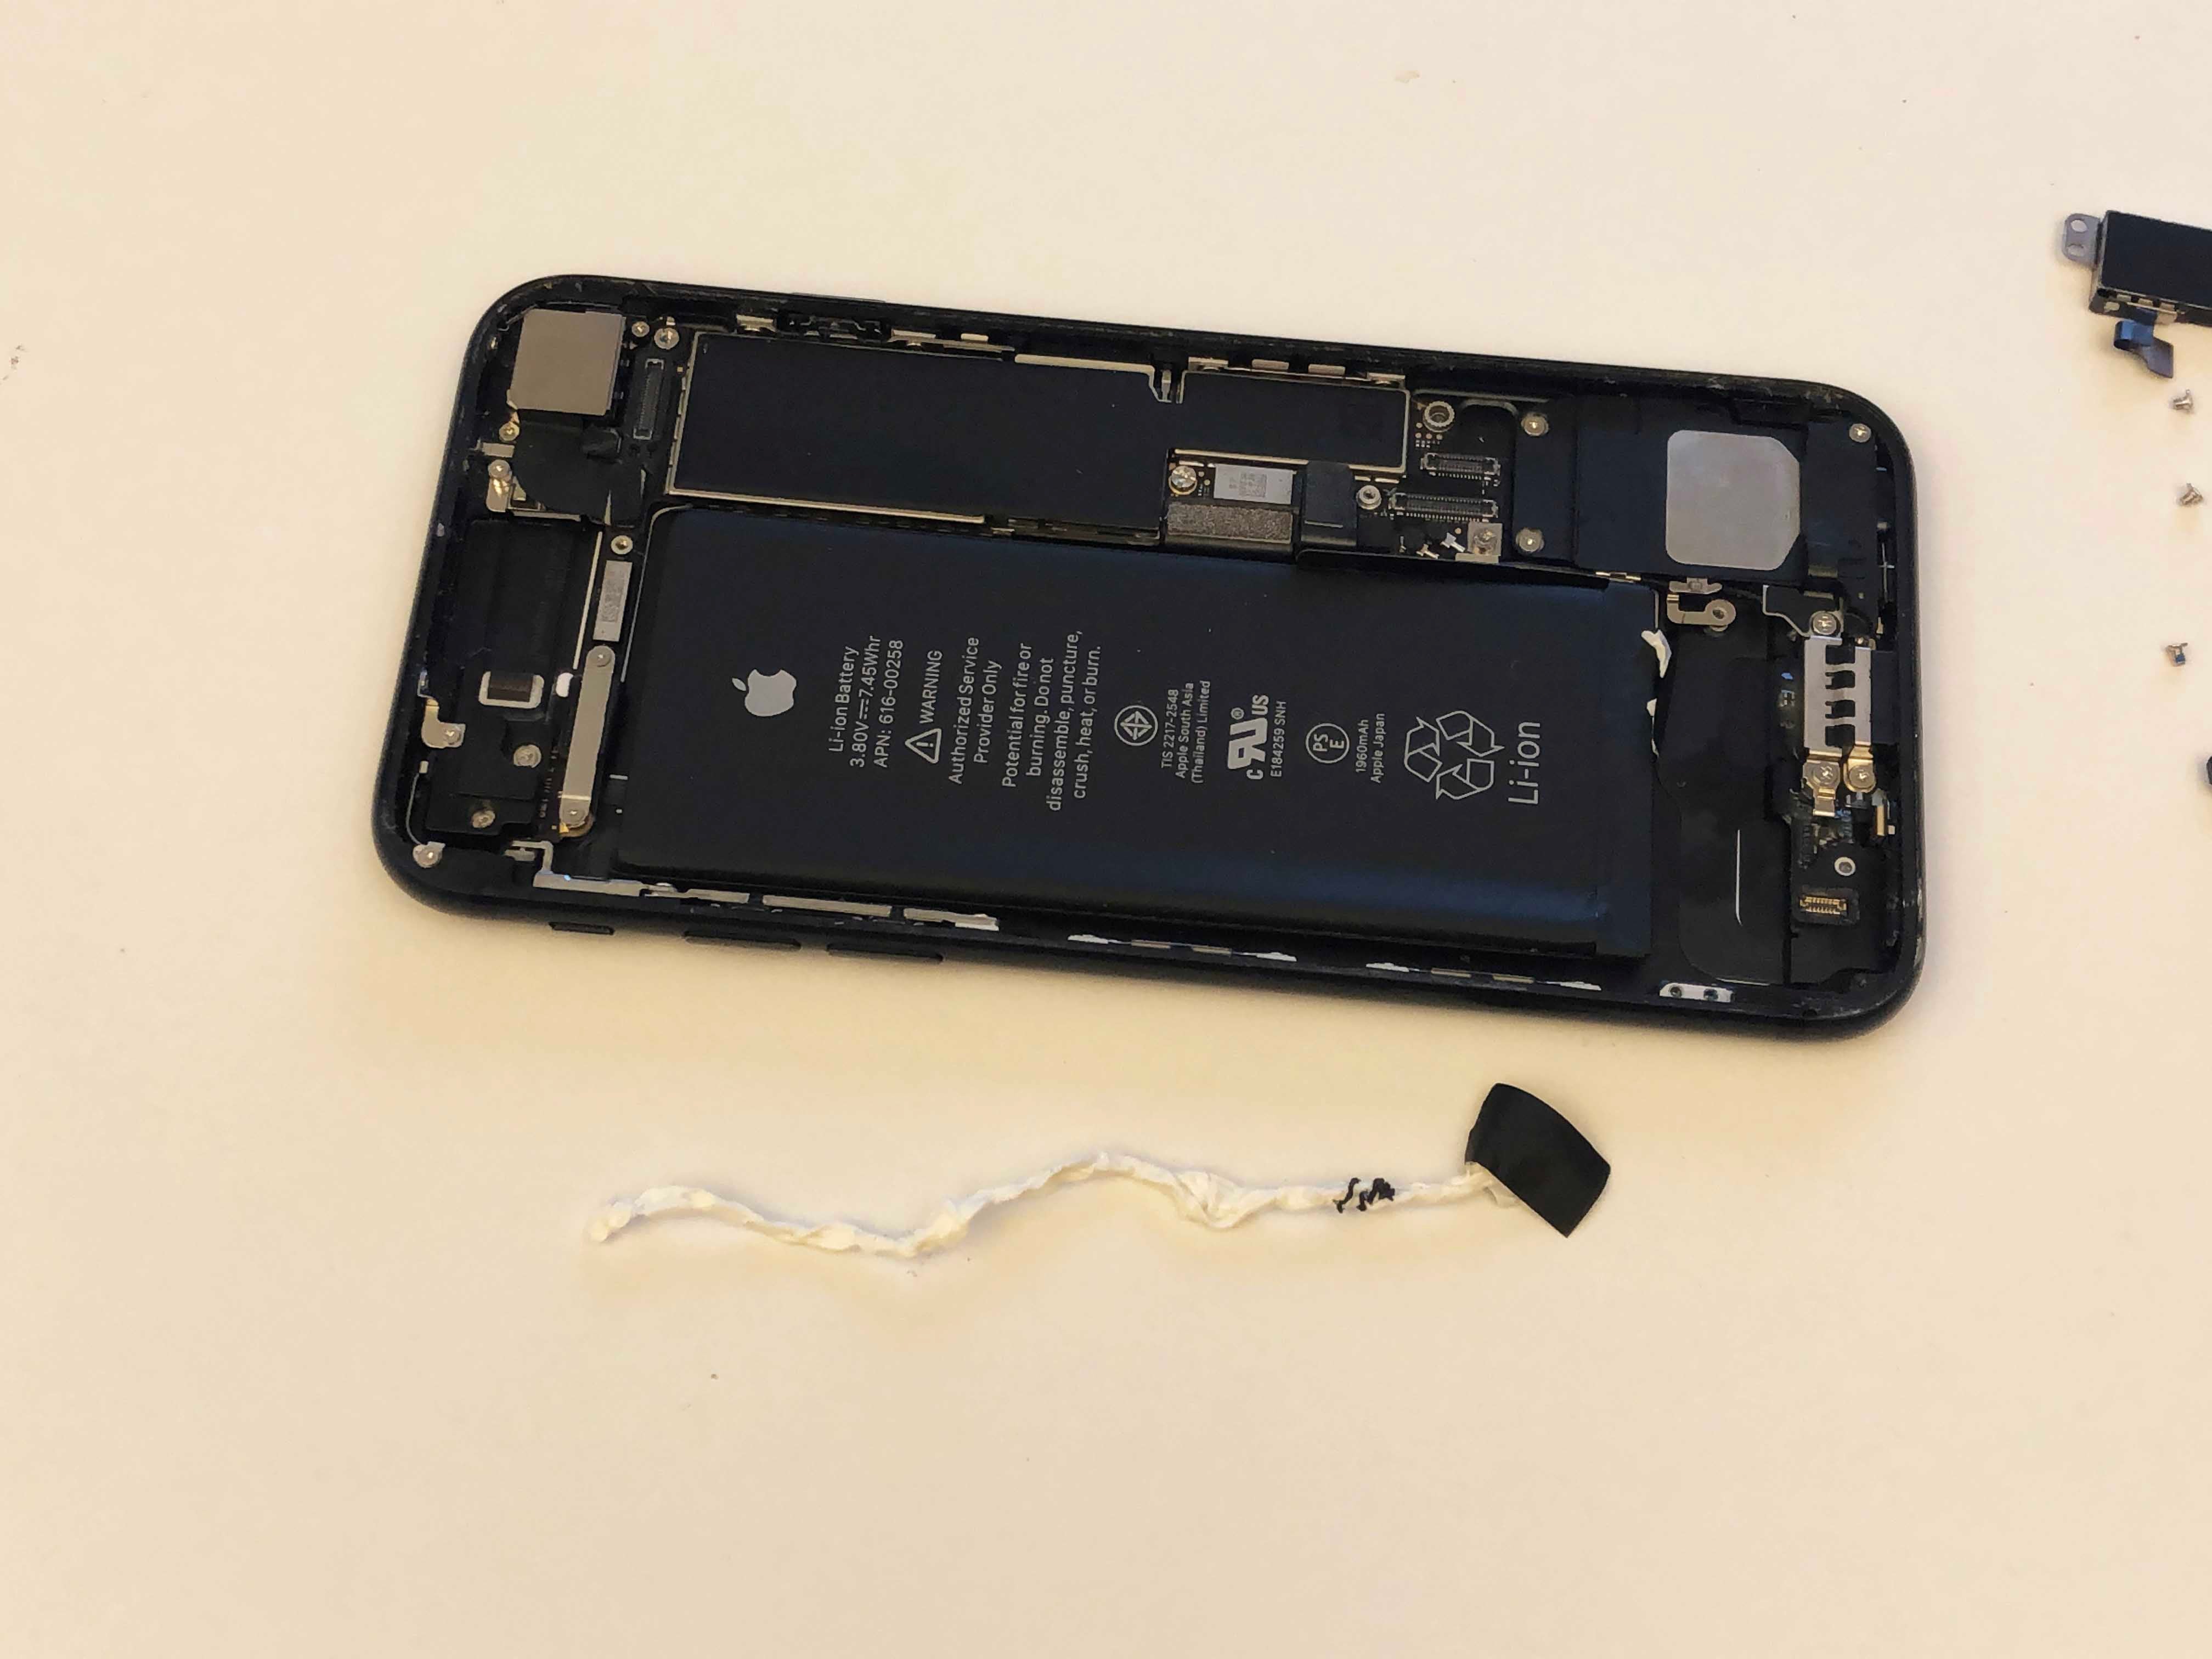 iPhone 7/7 Plus Battery Replacement - Removing the adhesives - 9